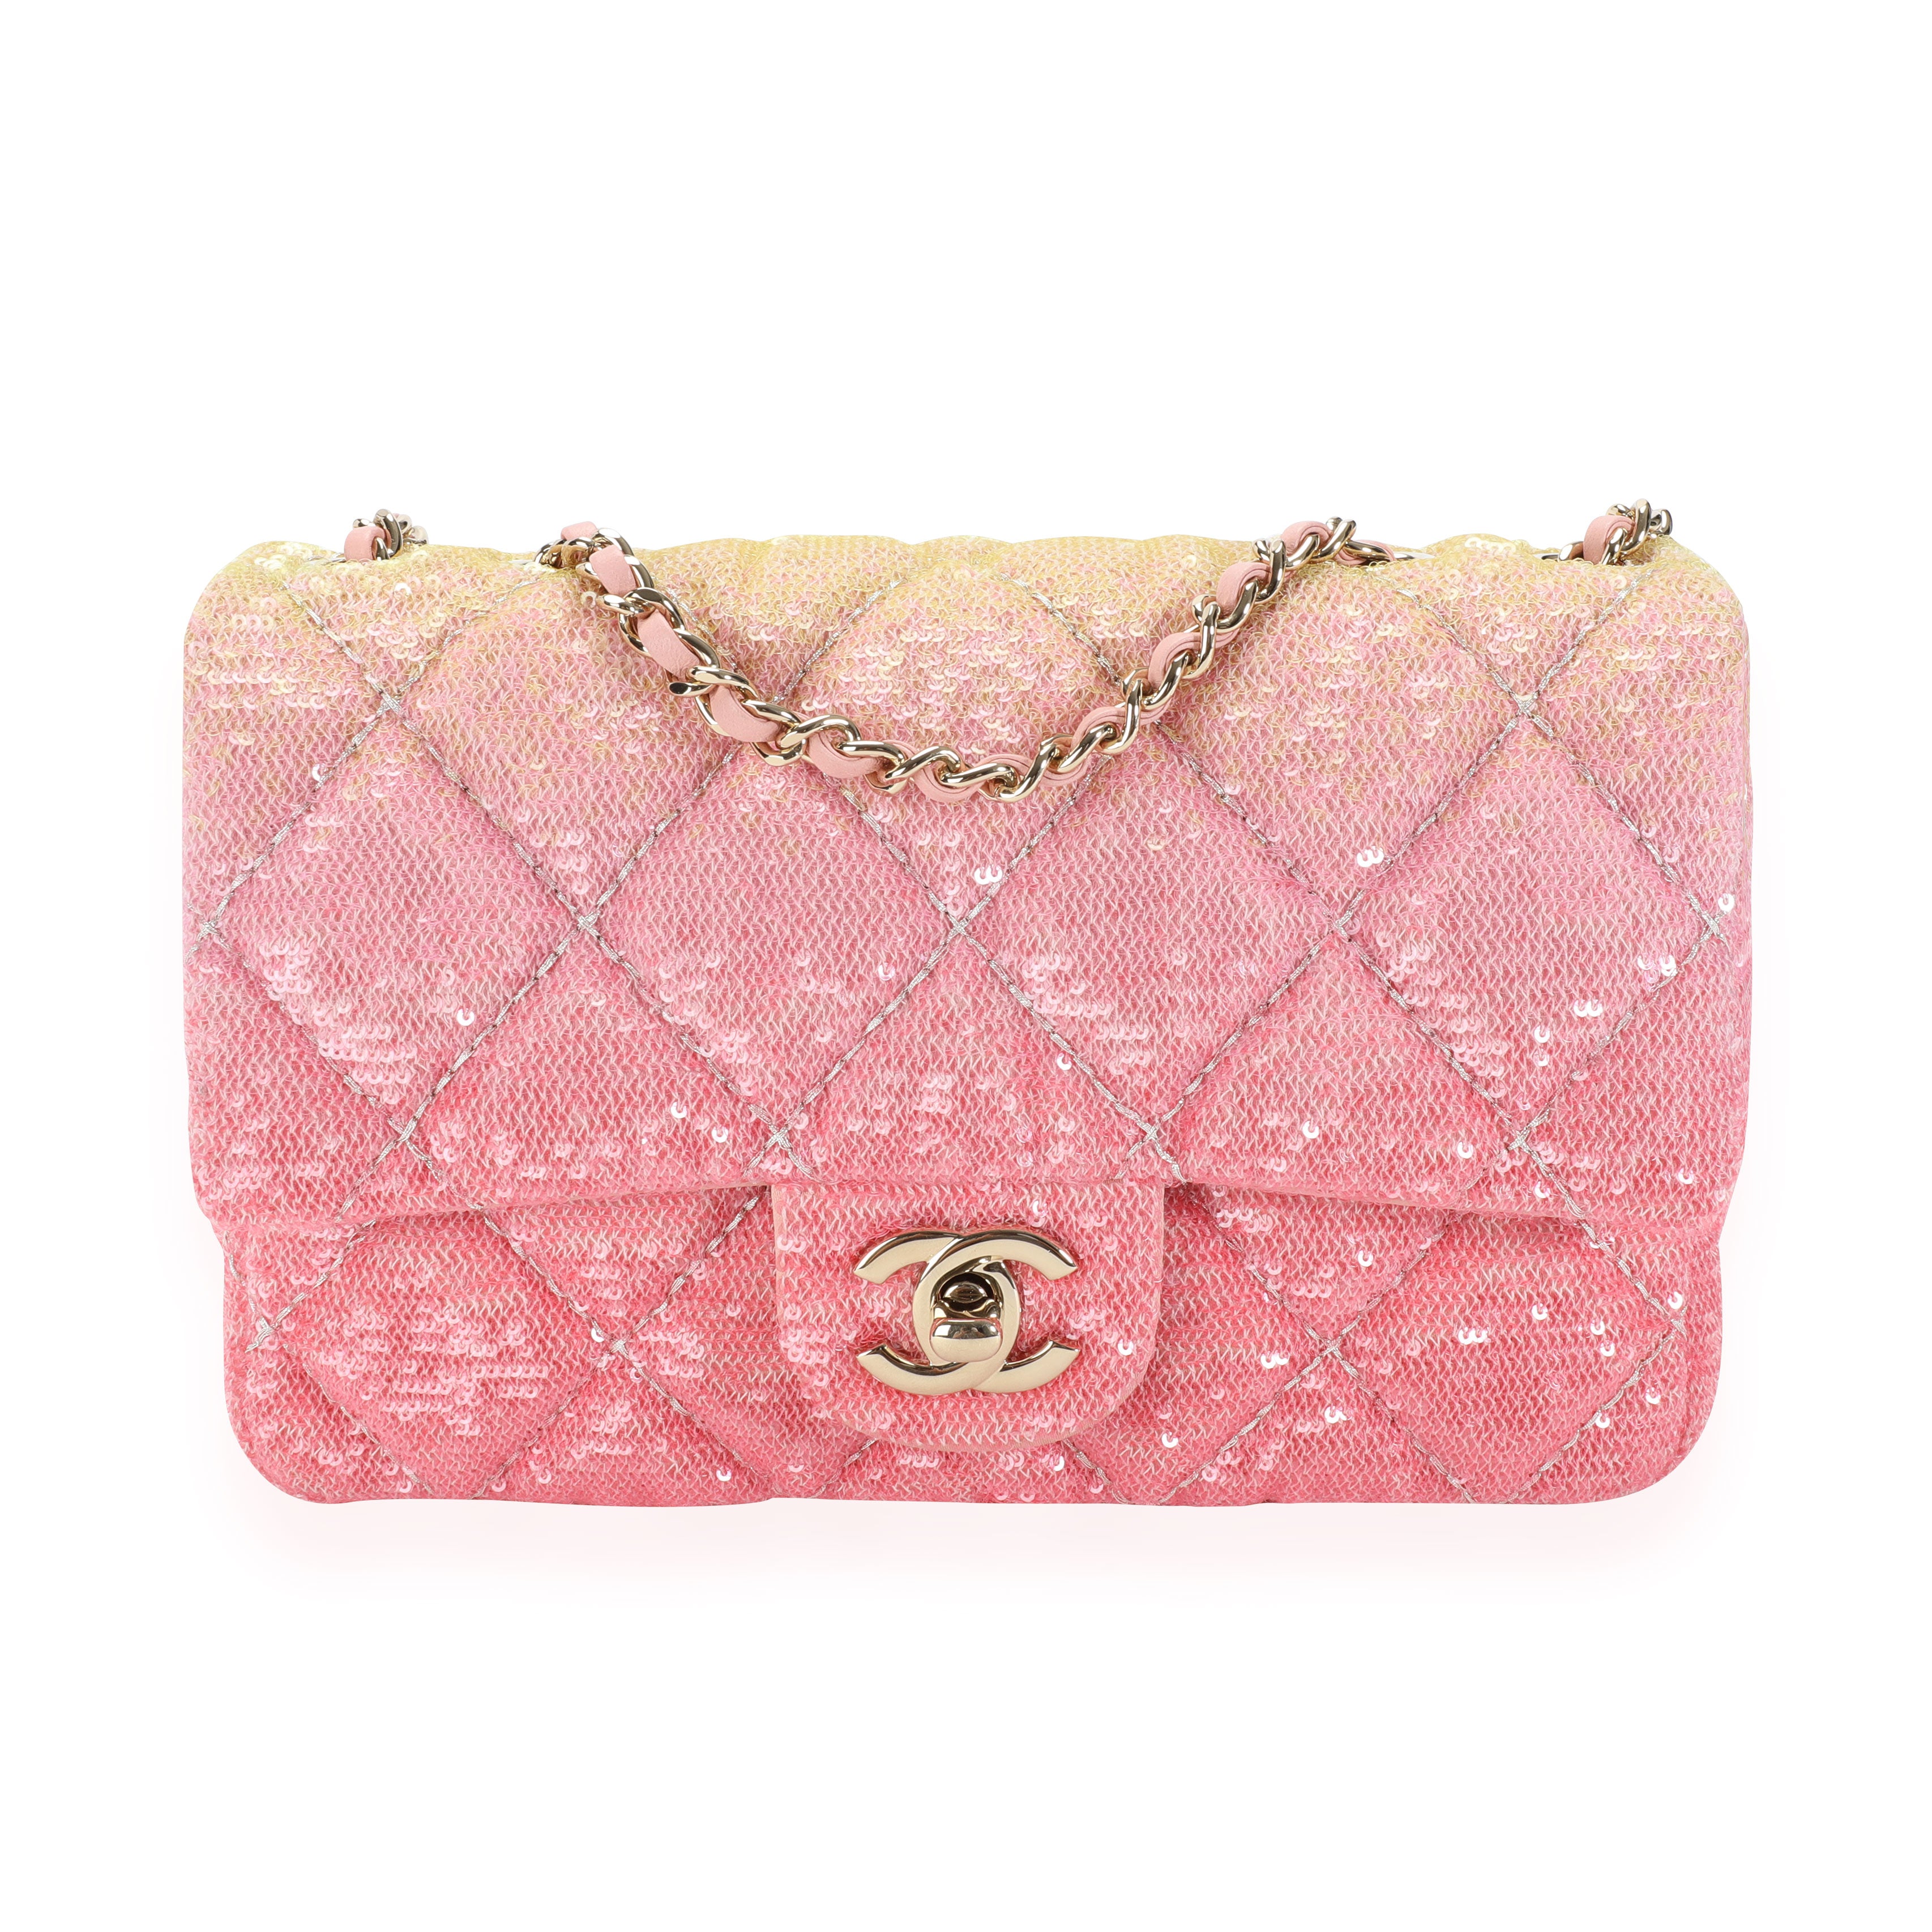 Chanel Mini Flap Bag, sequins, glass pearls & silver-tone metal, gray,  silver & pink - CHANEL